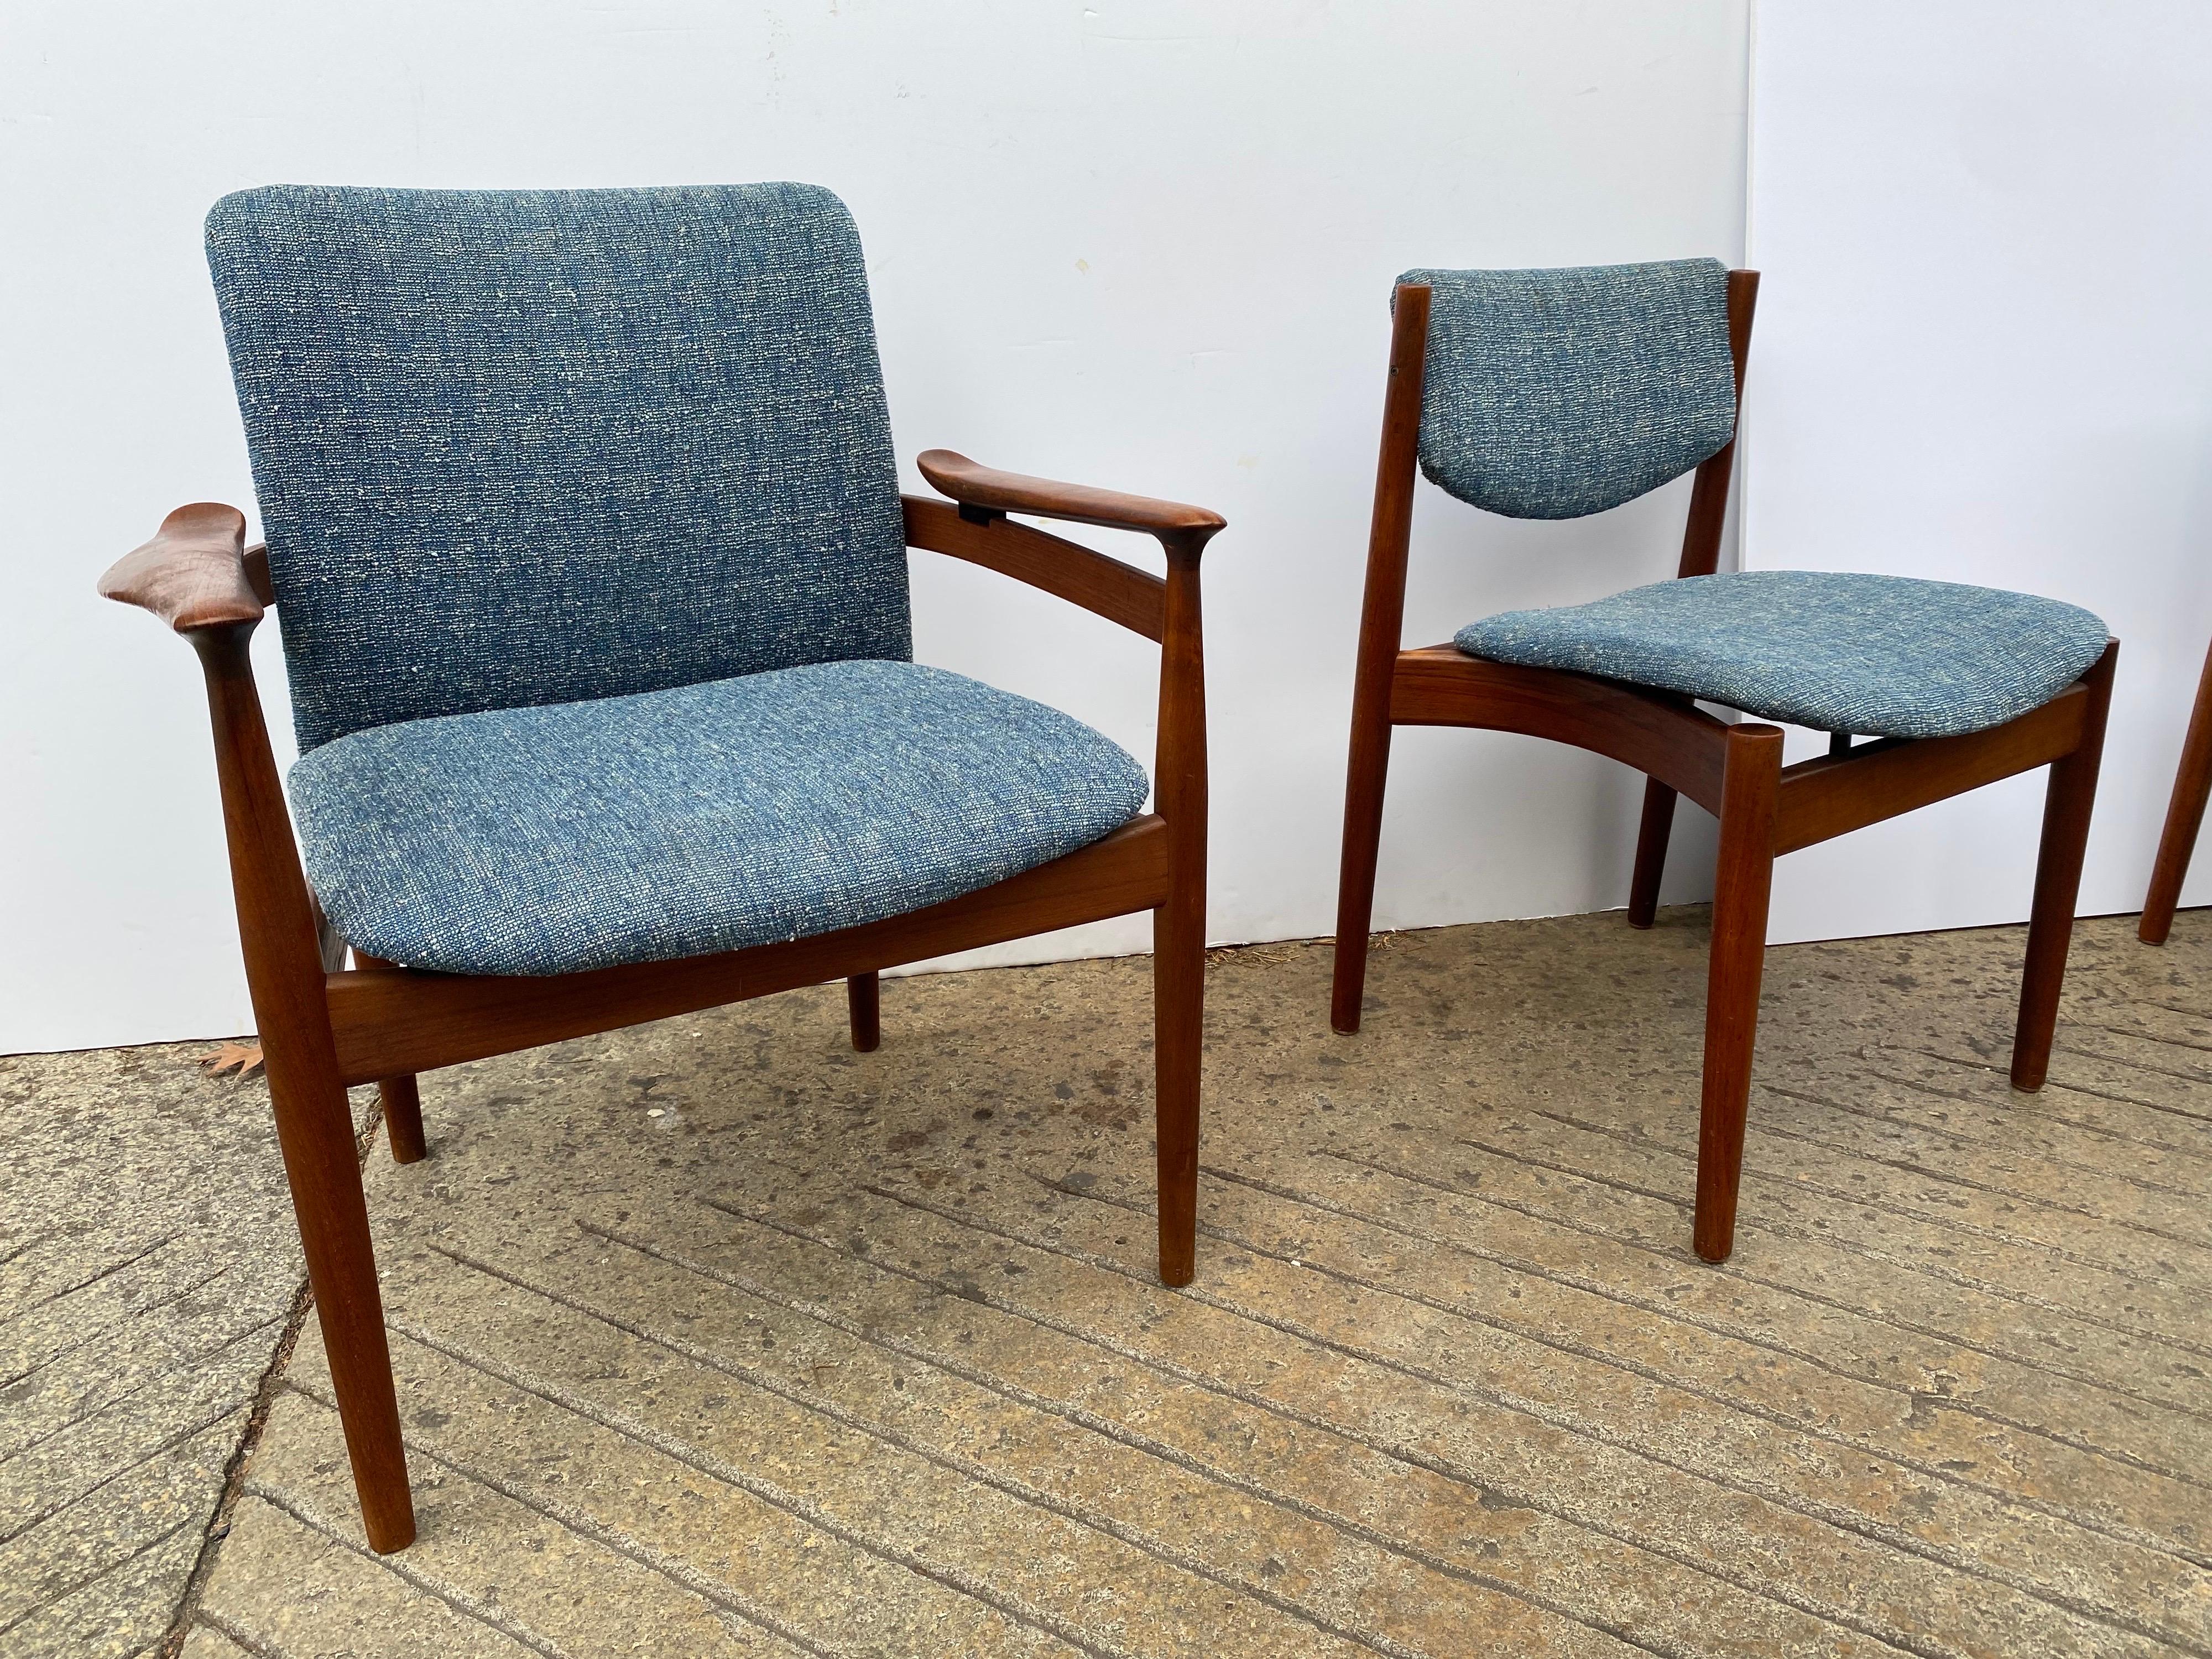 Set of 6 Finn Juhl Solid teak dining chairs, 2 arm and 4 armless floating chairs. Solid teak frames with seats and backs set slightly apart from wood frames to give a floating quality to the chairs. Beautifully made with attention given to every